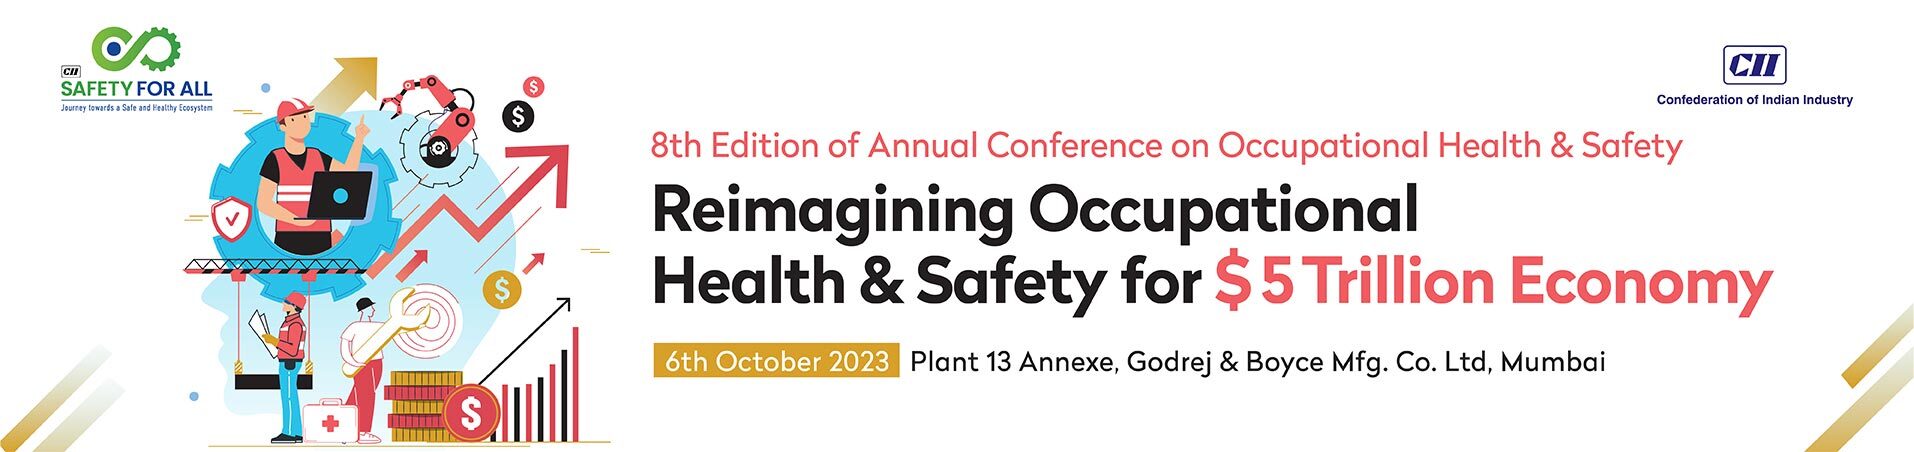 8th Edition on Annual Conference on Occupational Health & Safety